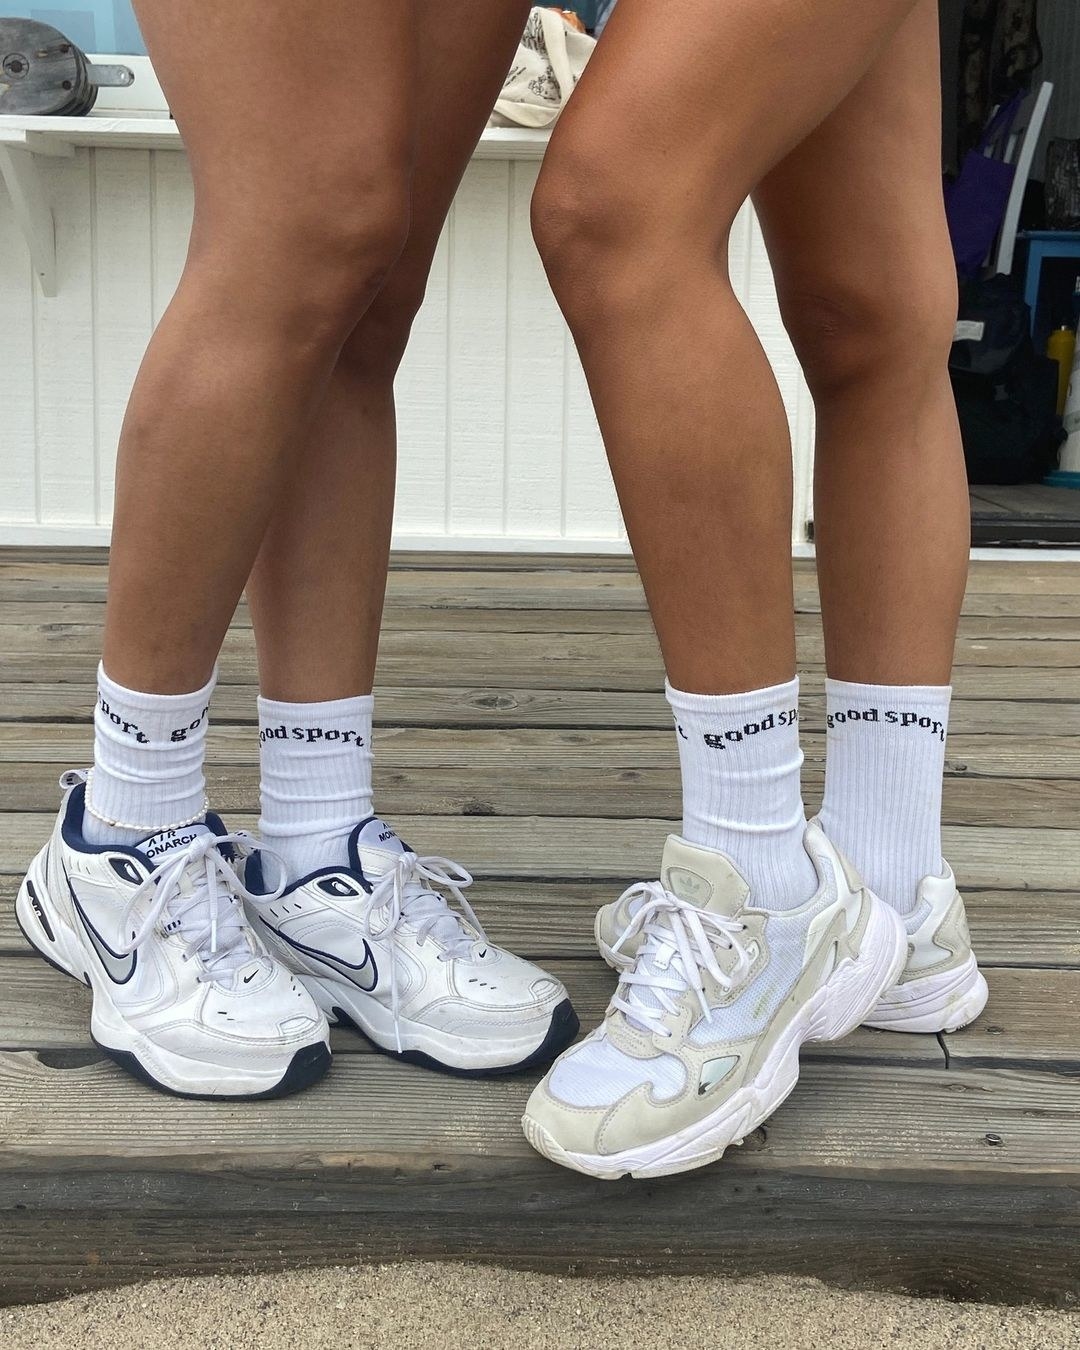 Two people wearing dad sneakers and crew socks